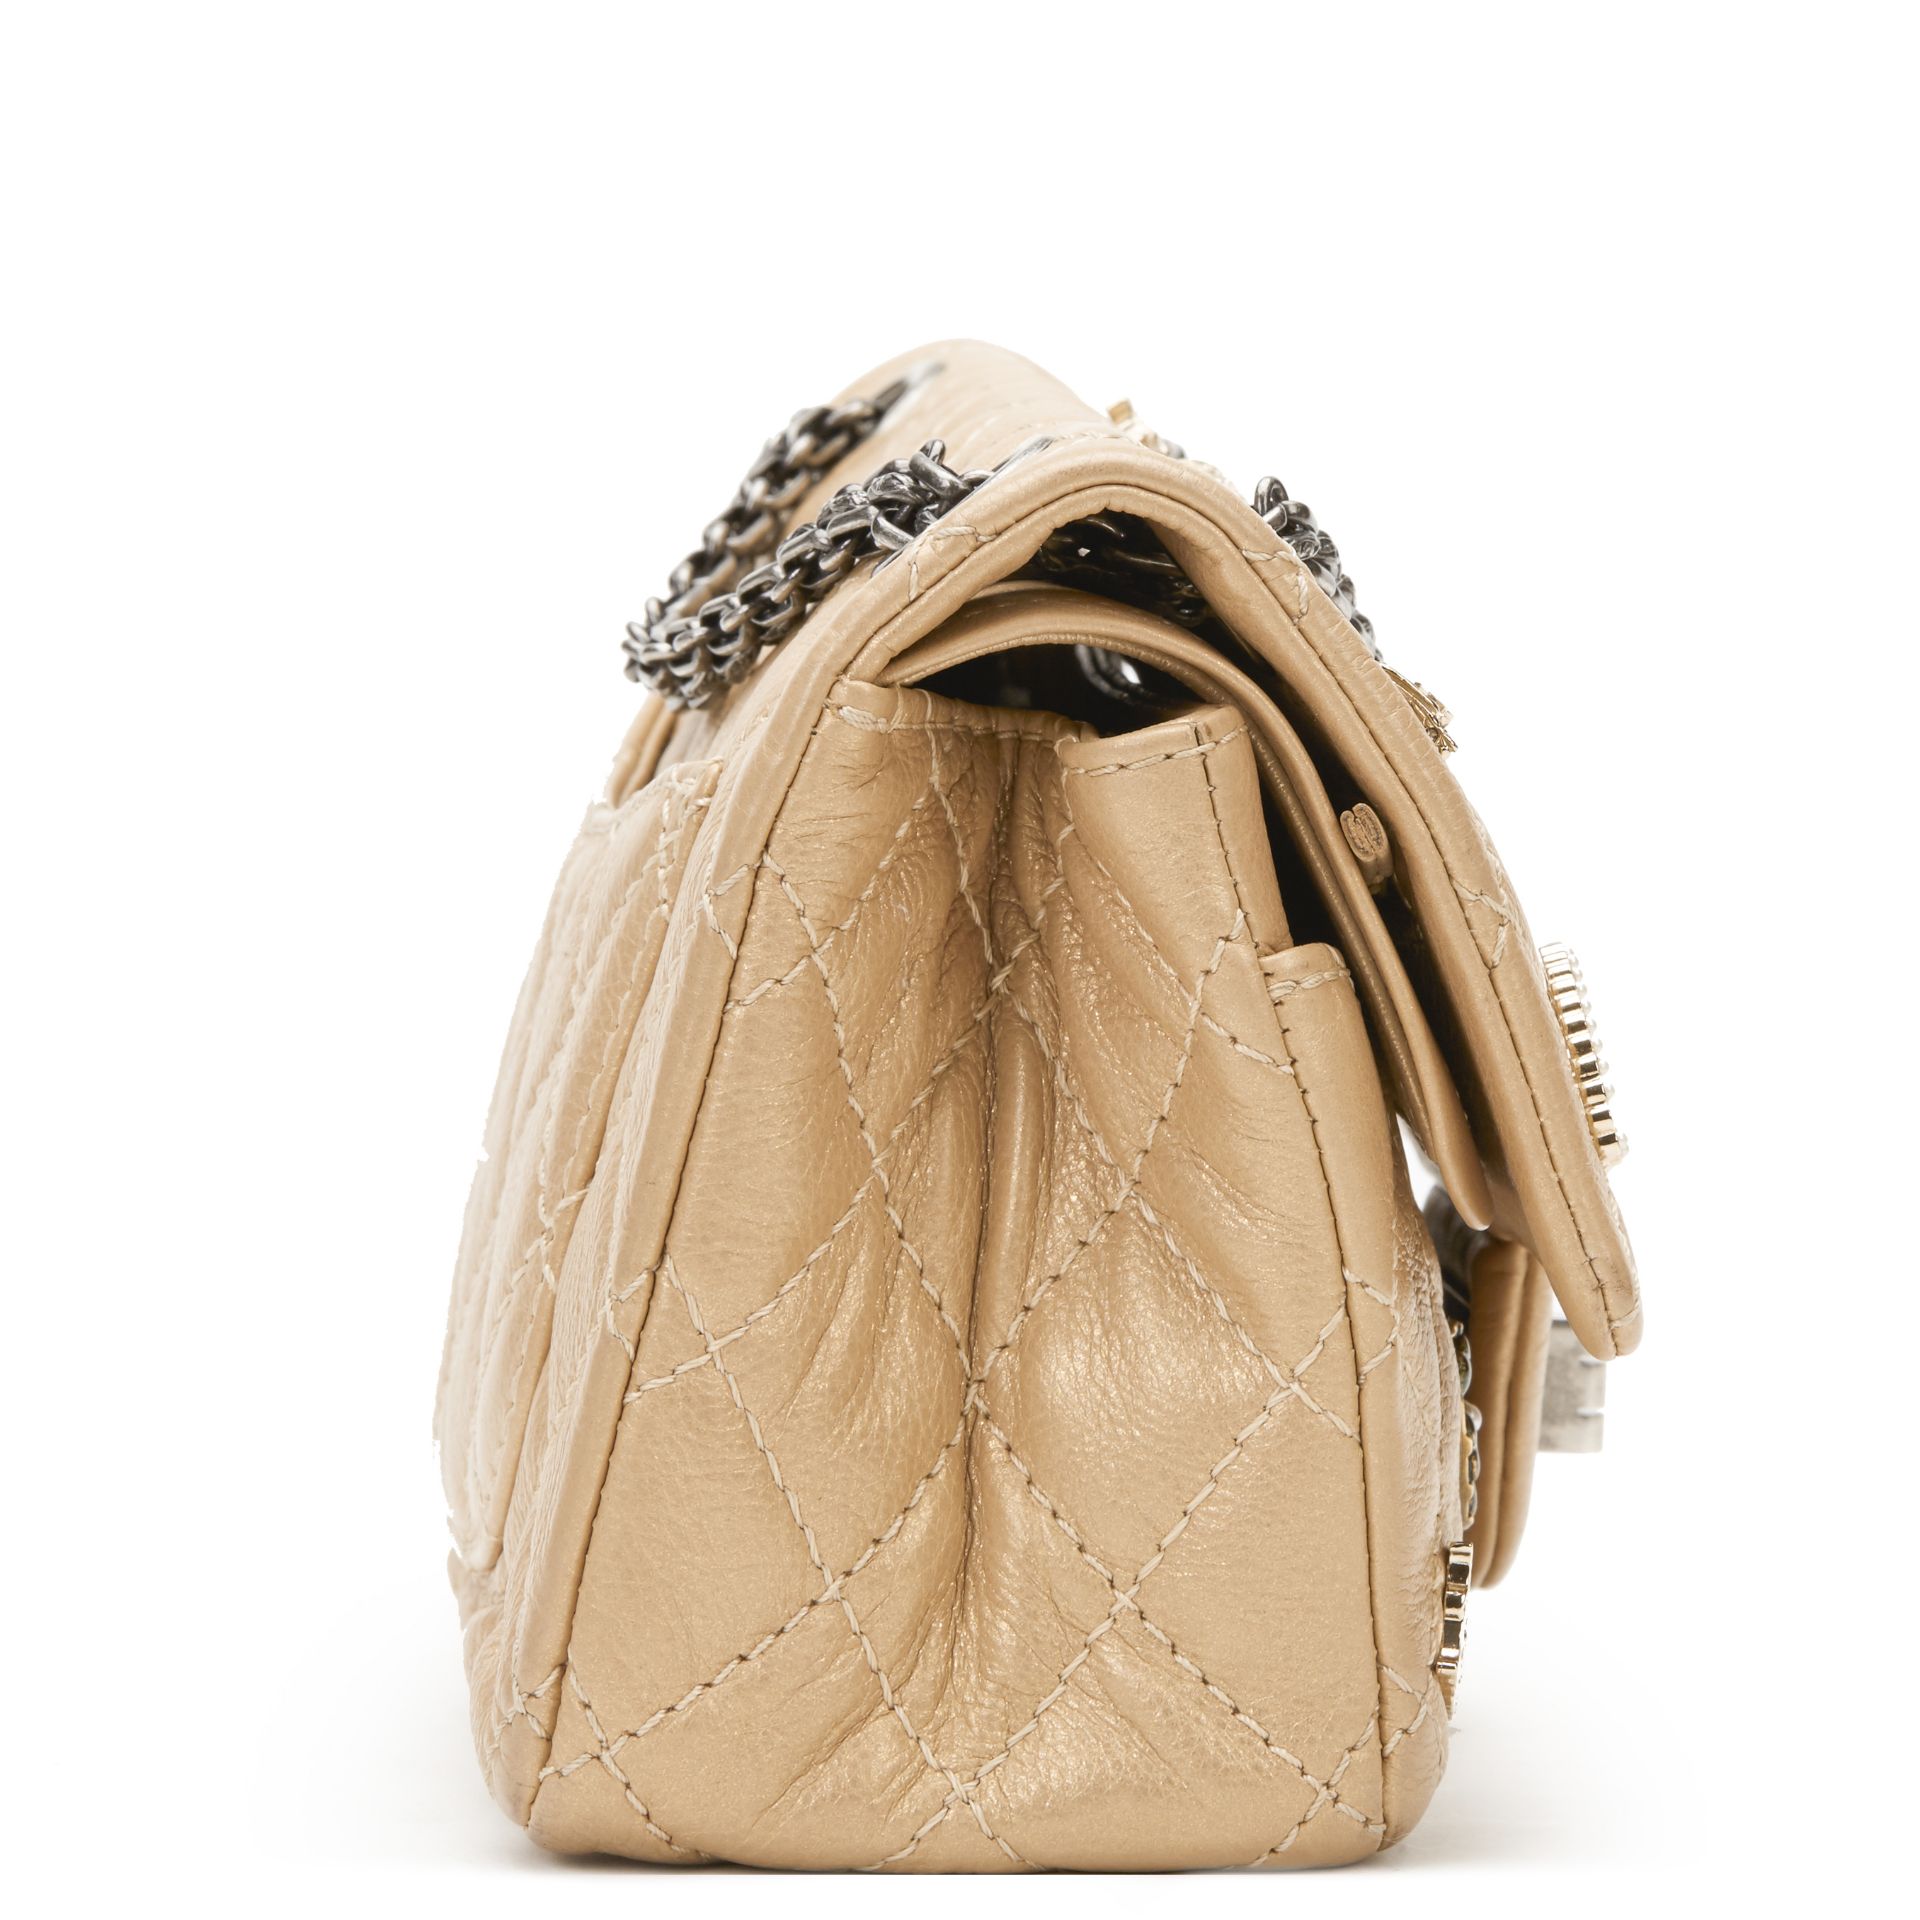 Gold Aged Metallic Calfskin Leather Lucky Charms 2.55 Reissue 224 Double Flap Bag - Image 3 of 13